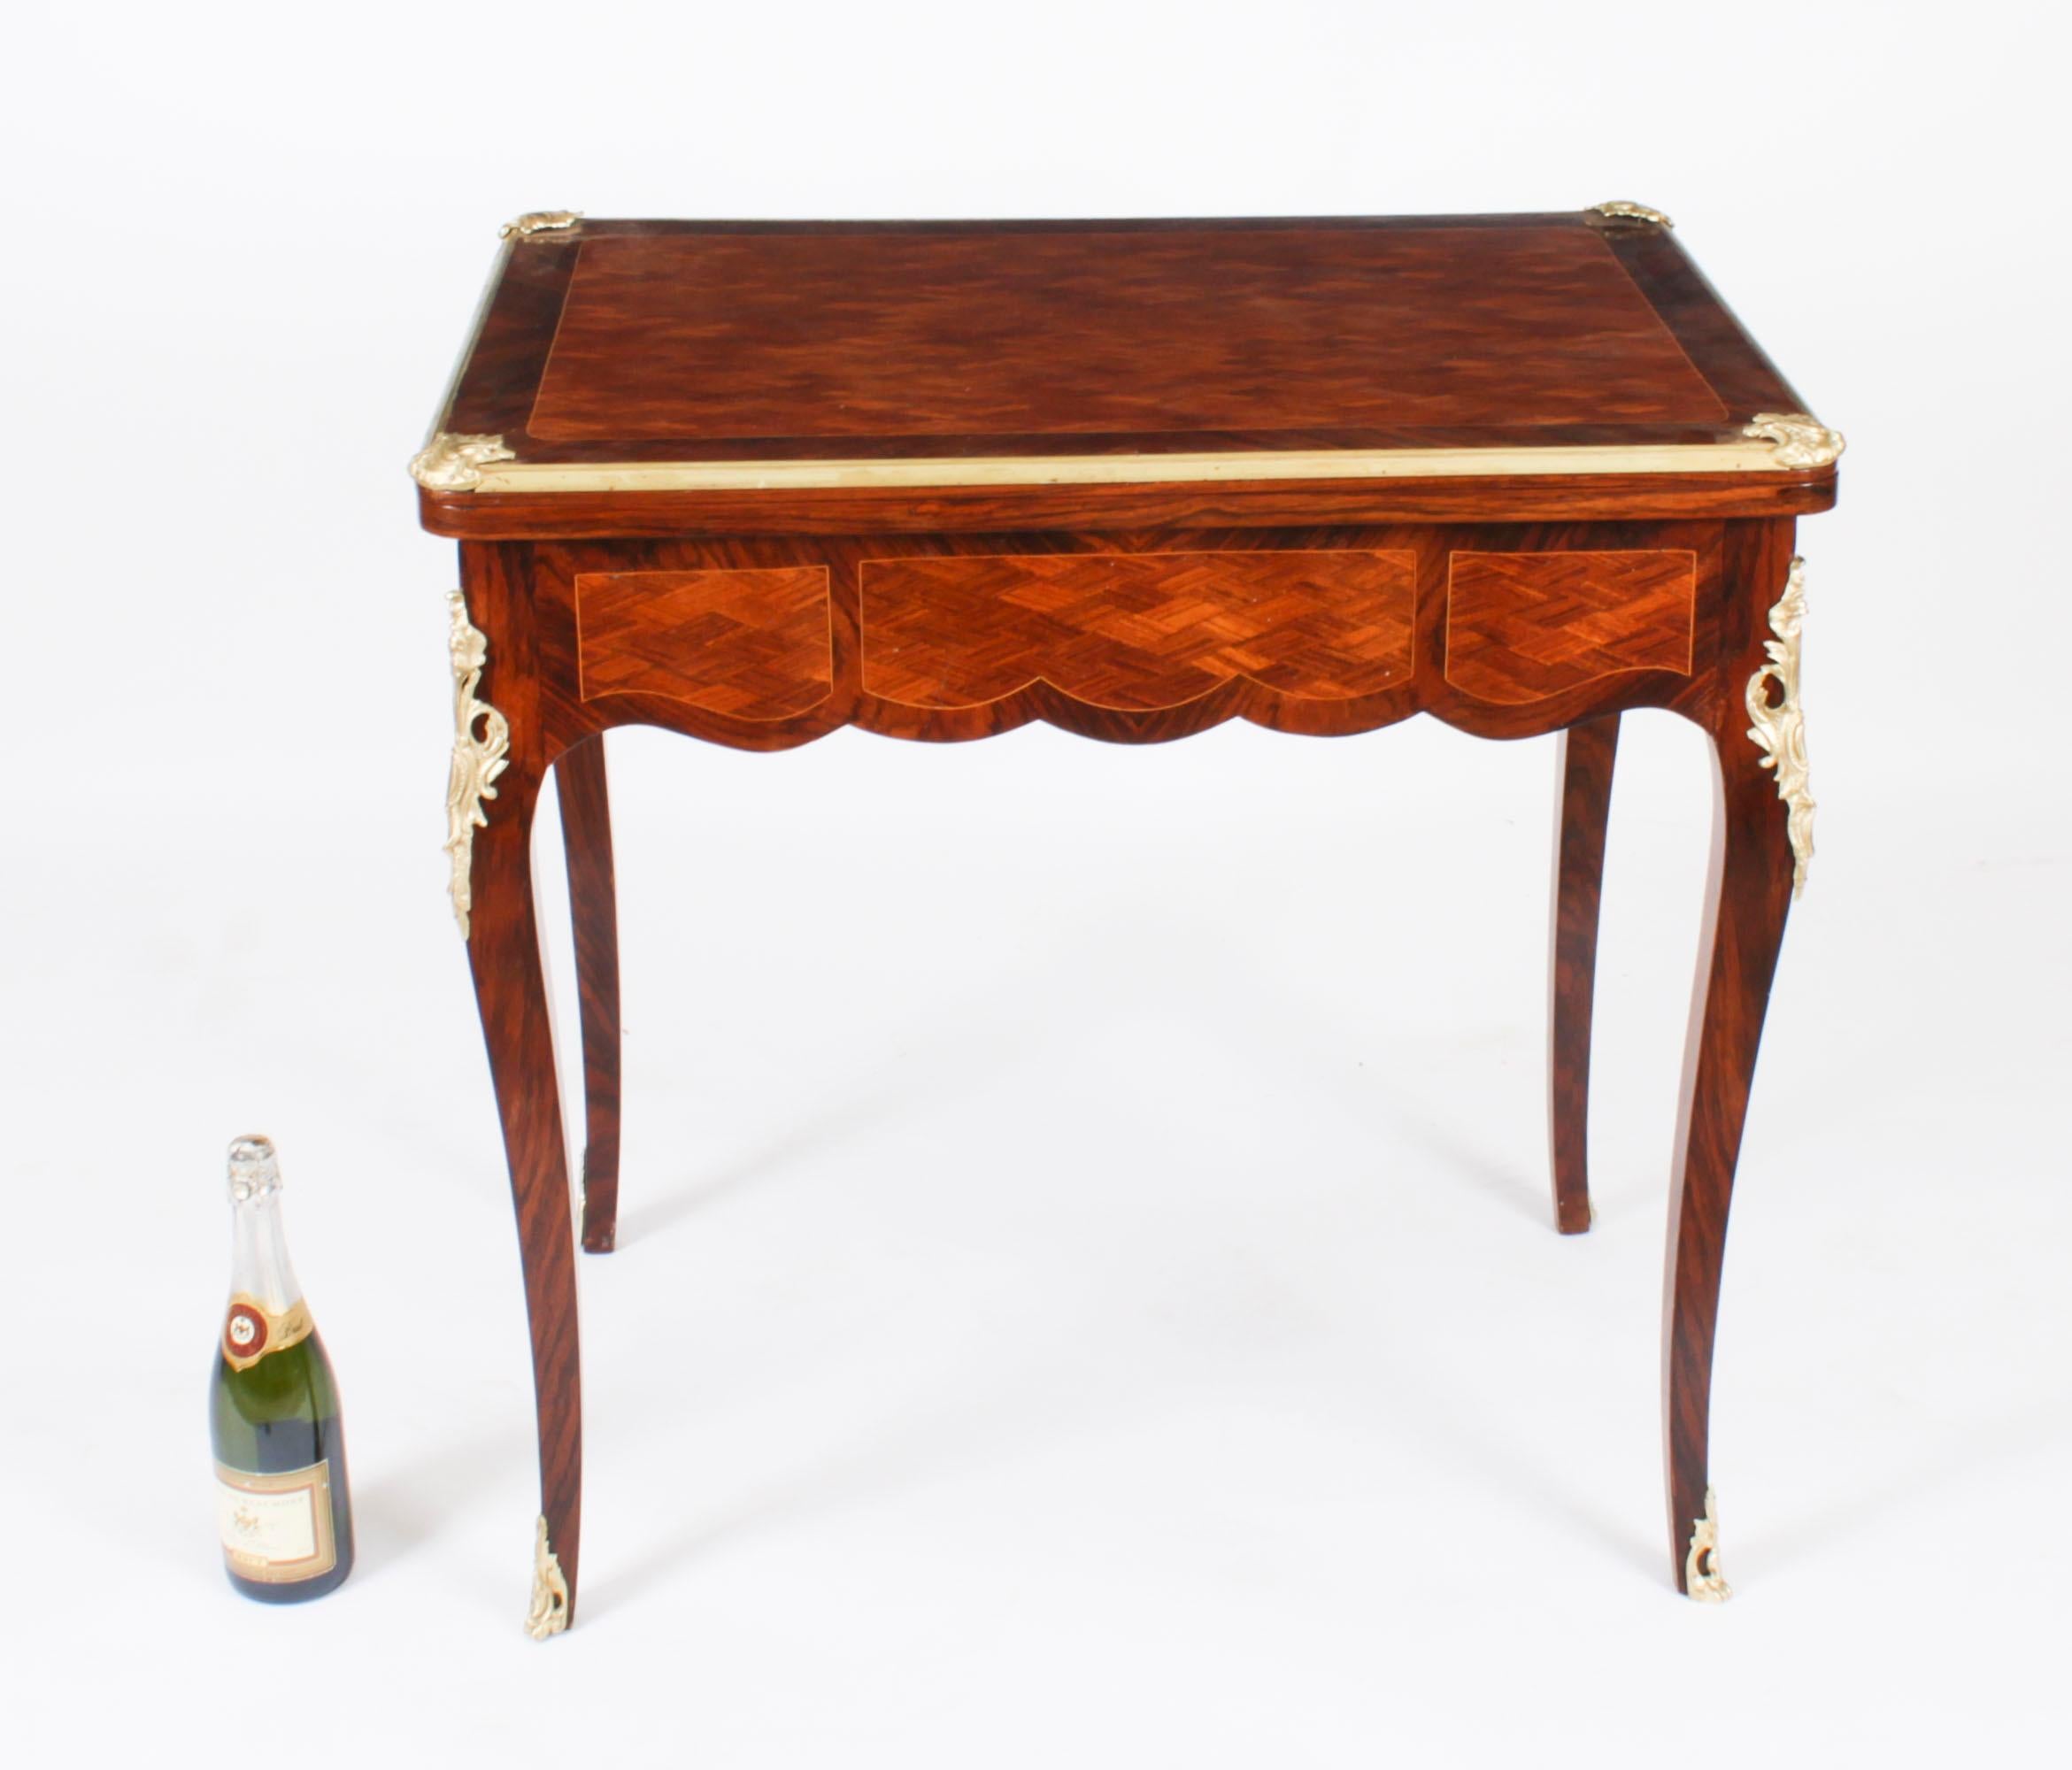 Antique French Burr Walnut Parquetry Card Backgammon Table 19th Century For Sale 12